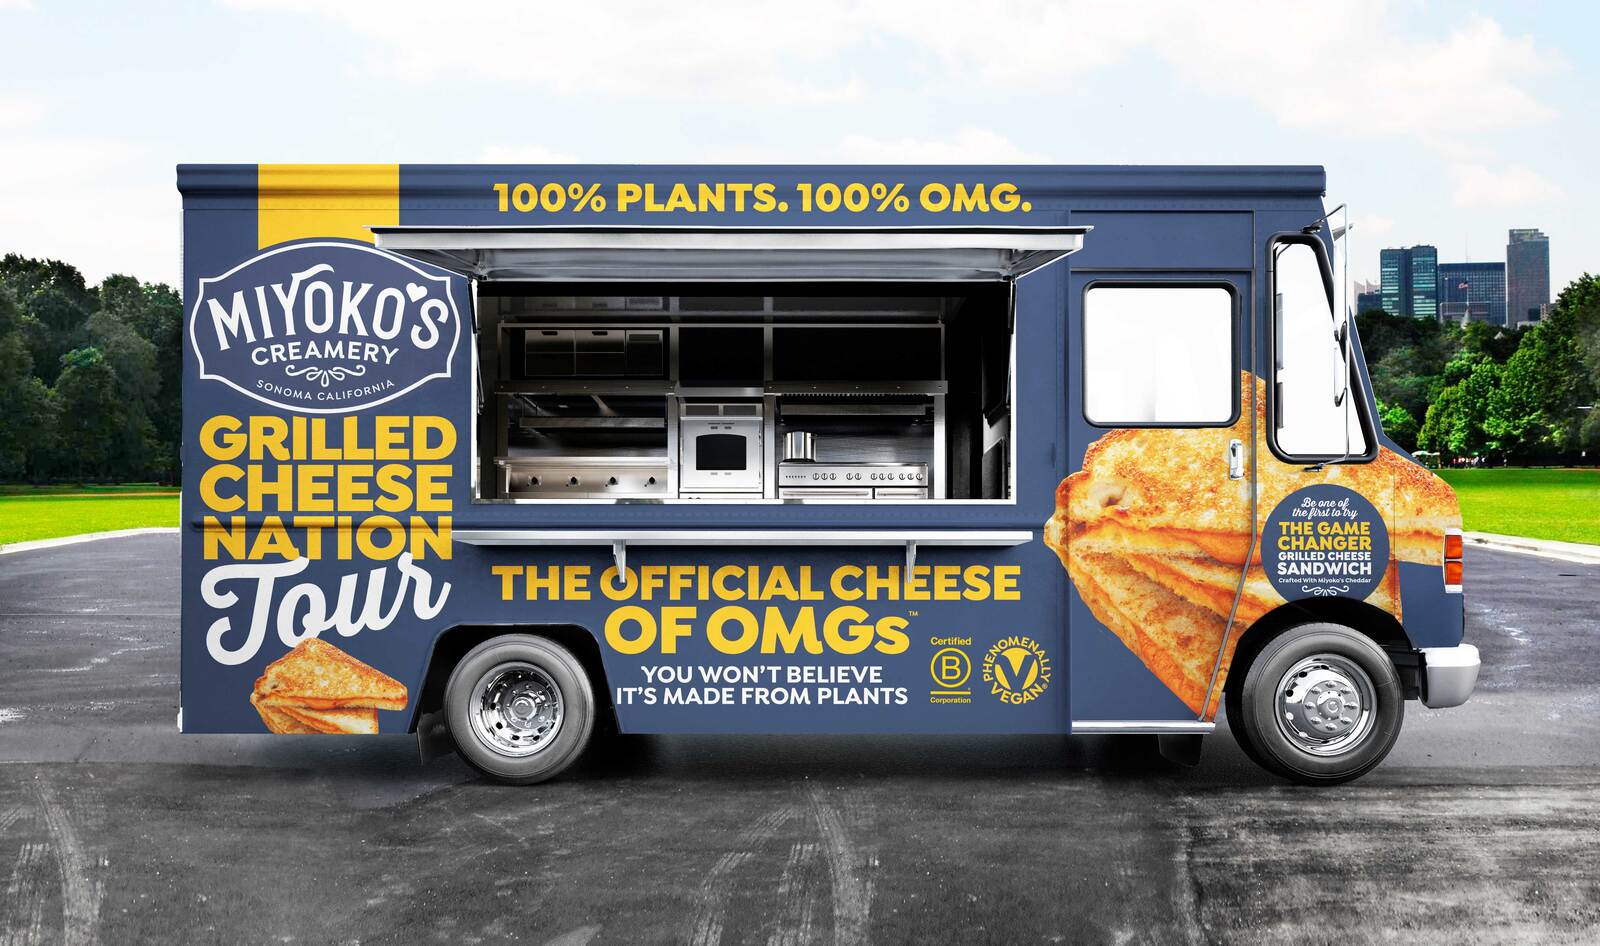 Miyoko’s Food Truck to Give Away 15,000 Vegan Grilled Cheese Sandwiches in Cross-Country Tour